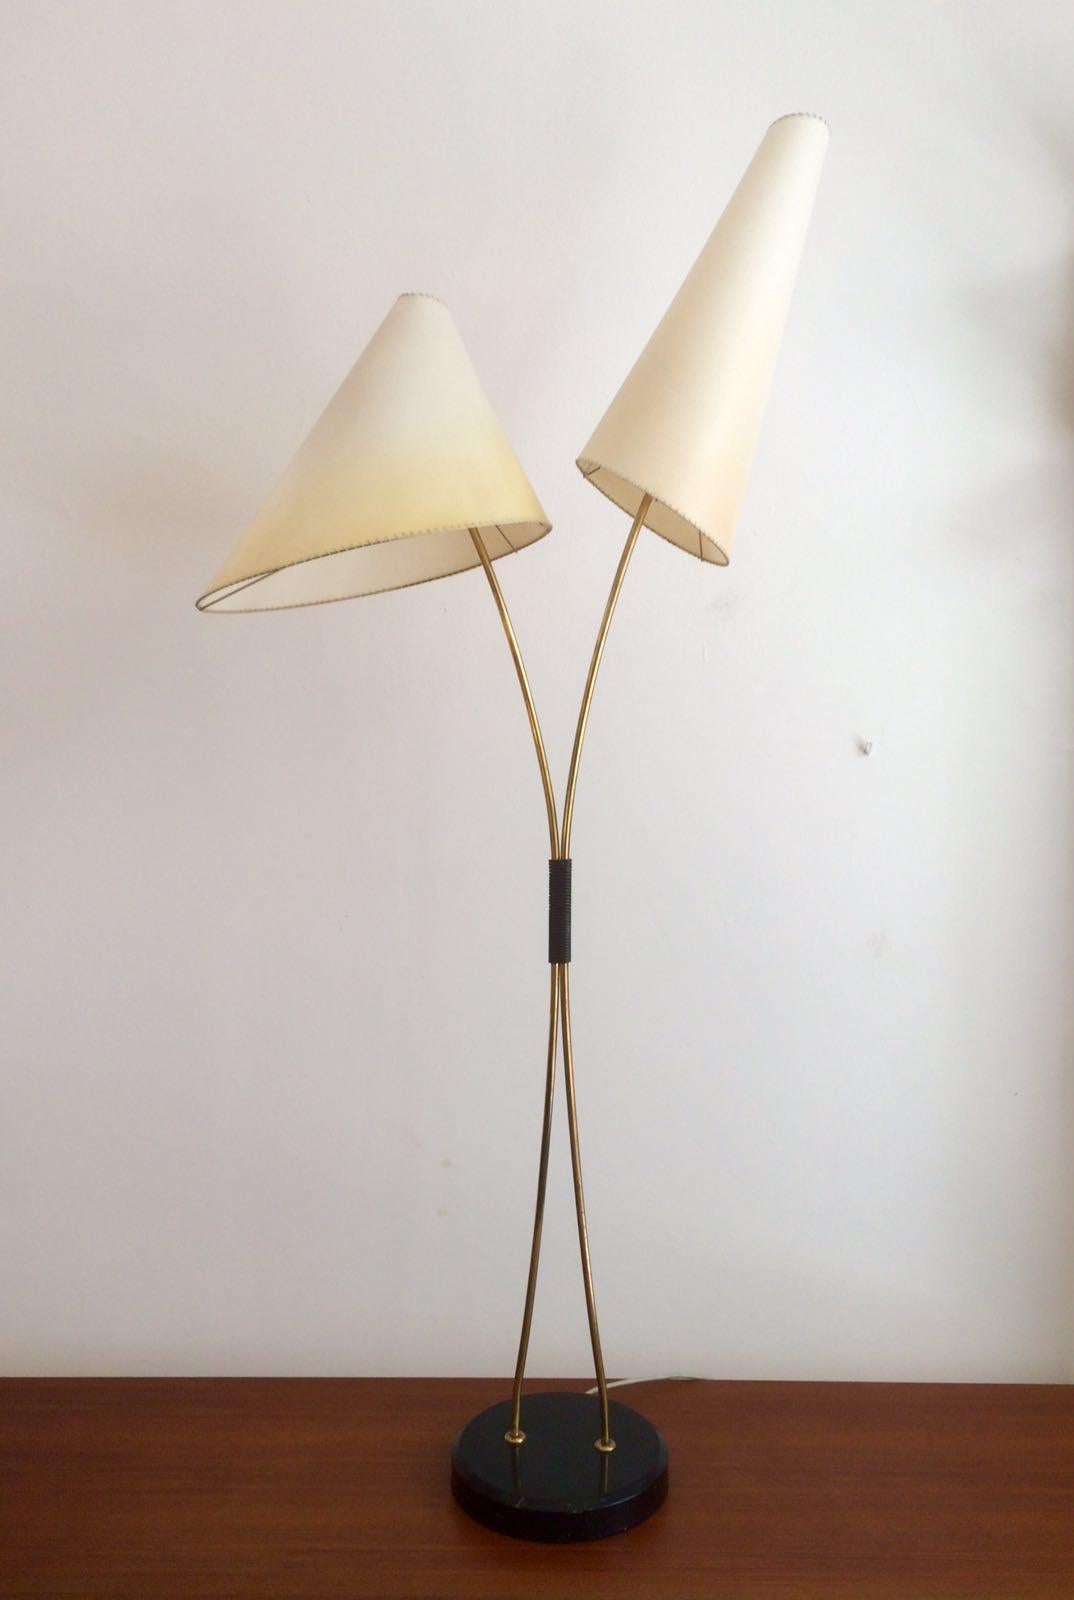 Floor lamp, 1950s. Produced in Germany.